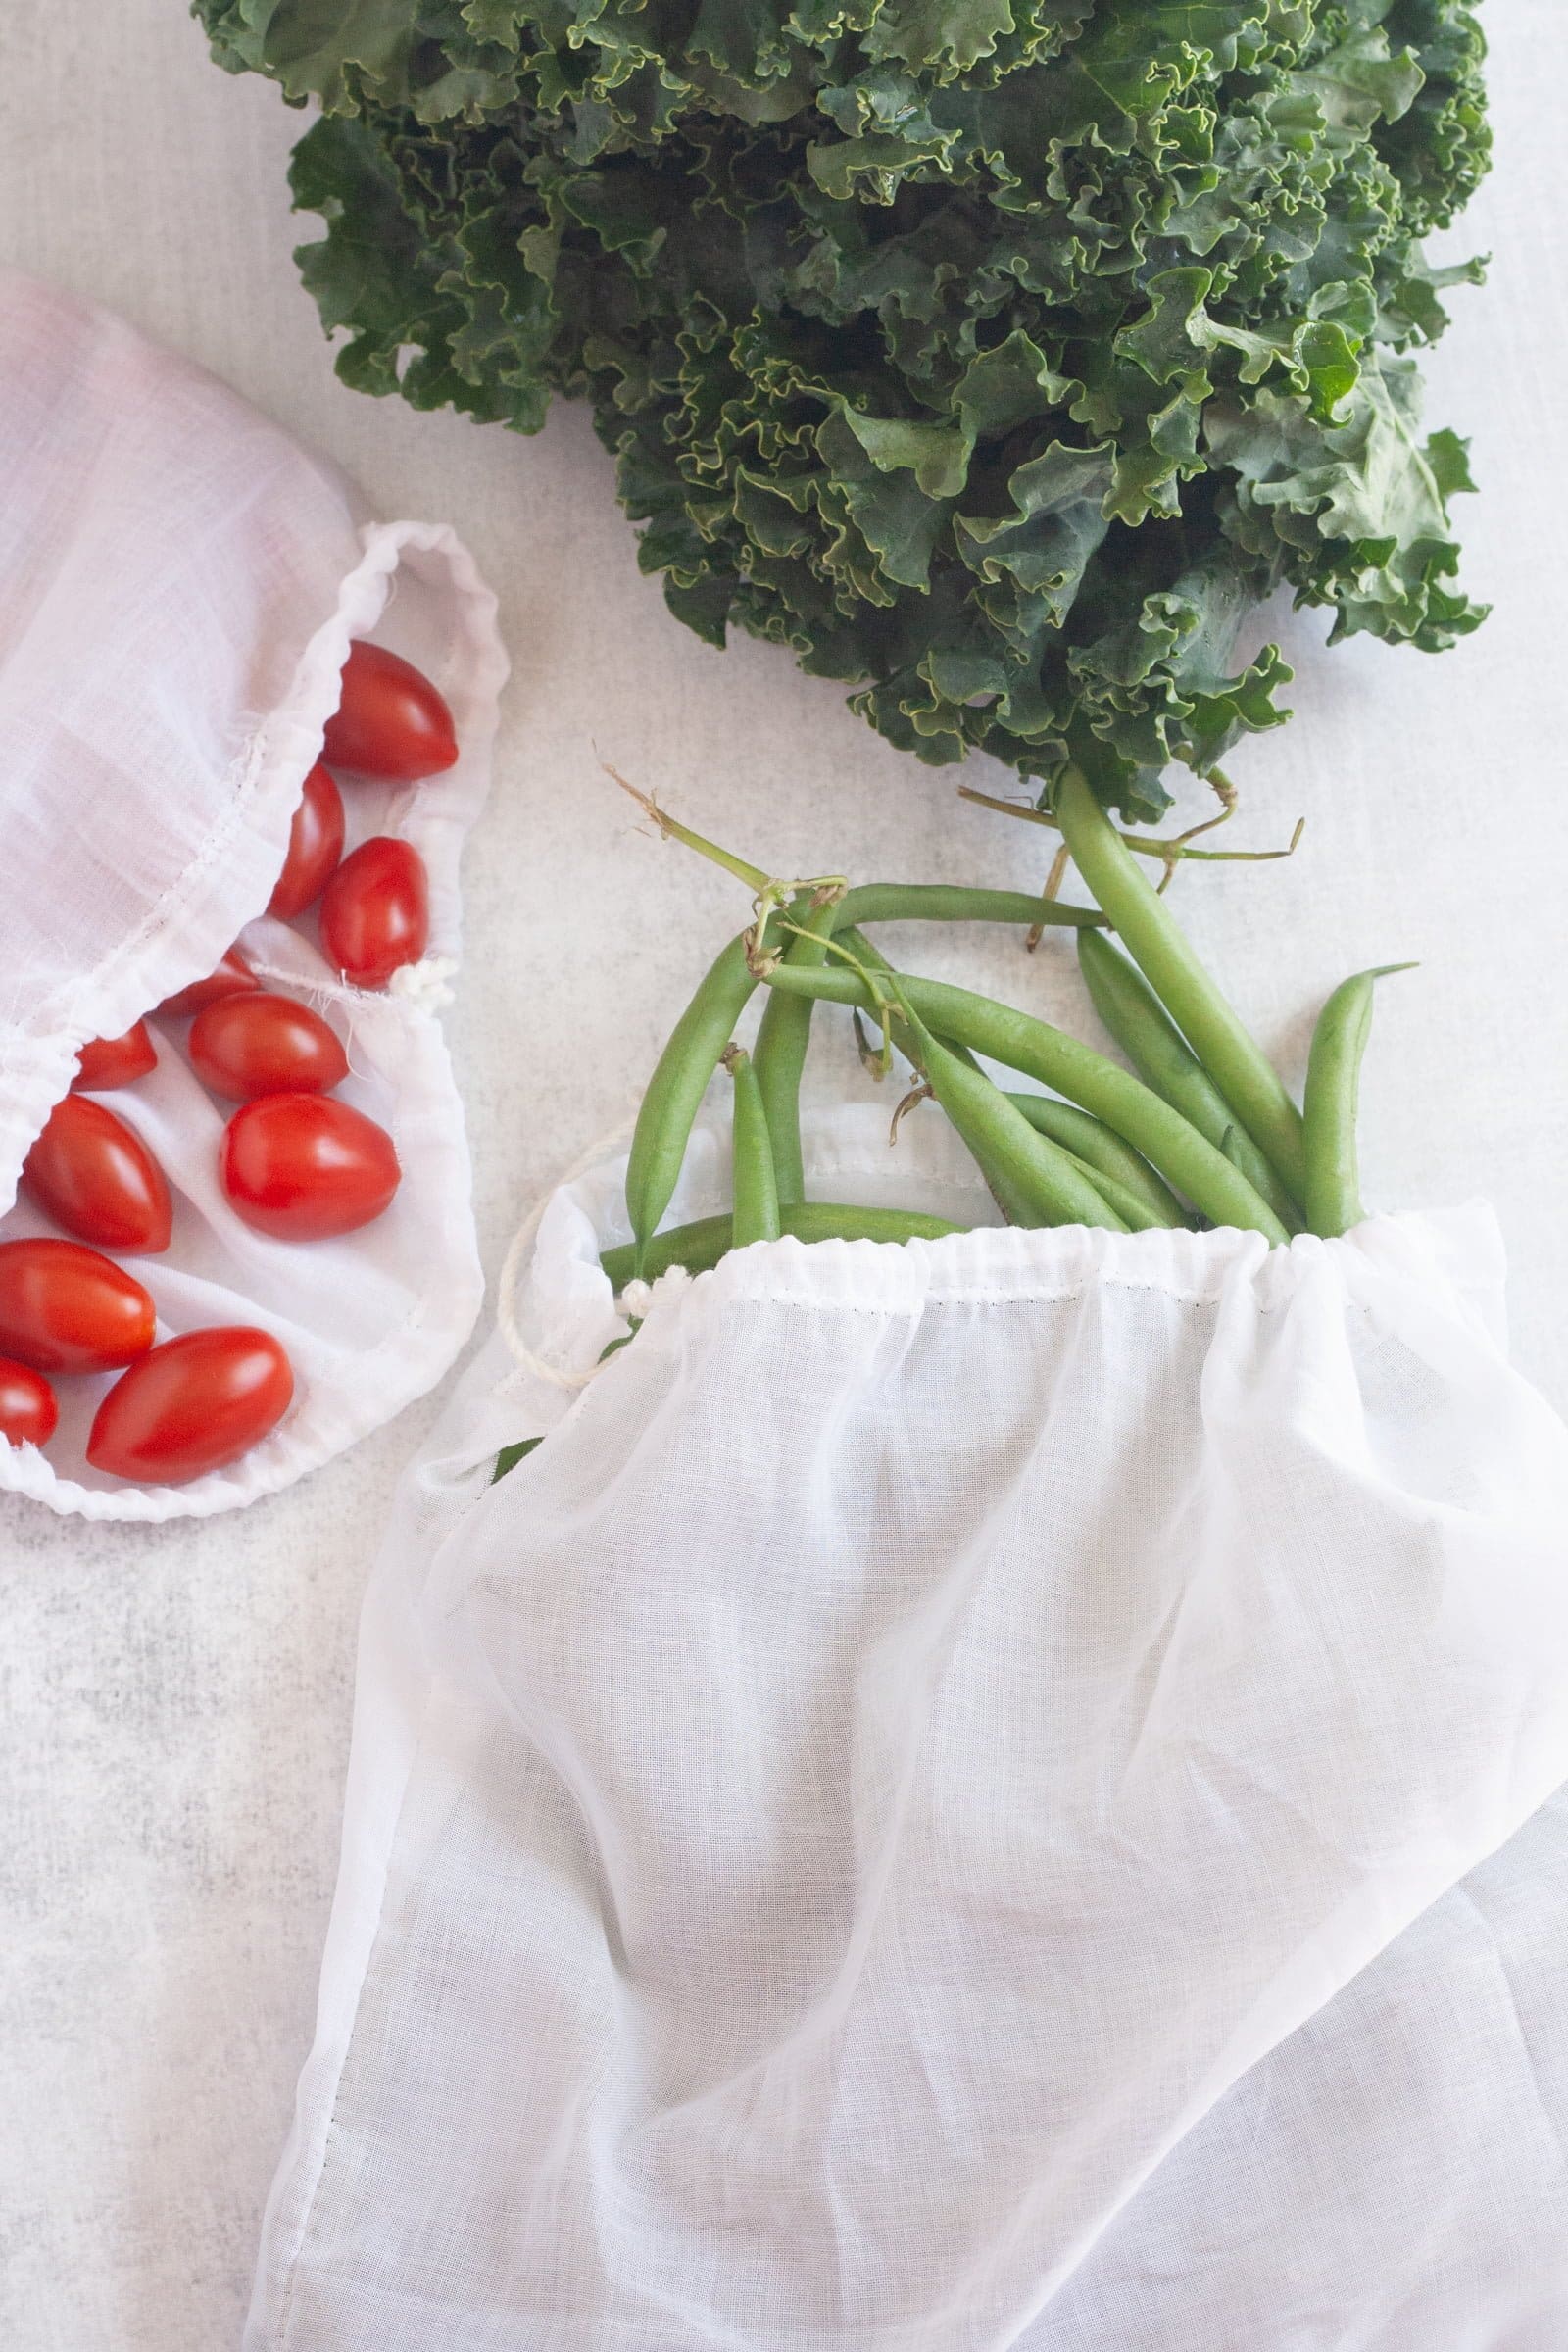 How to Make Easy Reusable Produce Bags